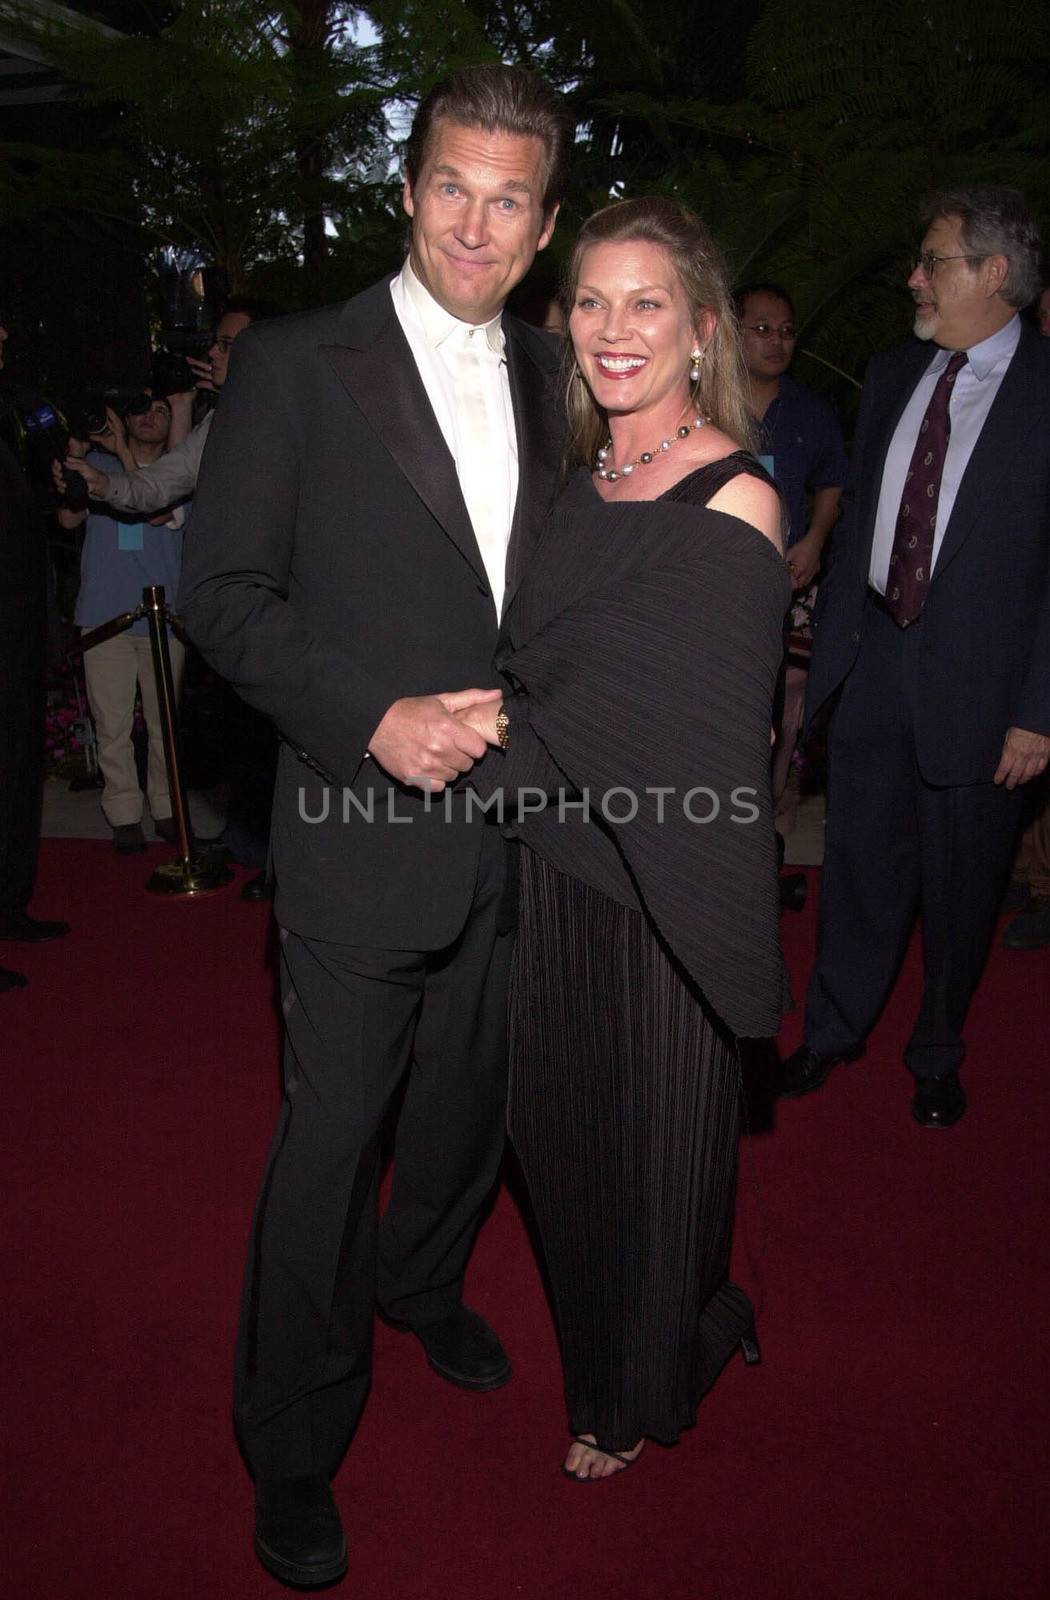 Jeff and Susan Bridges at the 4th Annual Raul Julia Ending Hunger Fund Benefit, Beverly Hills, 04-30-00